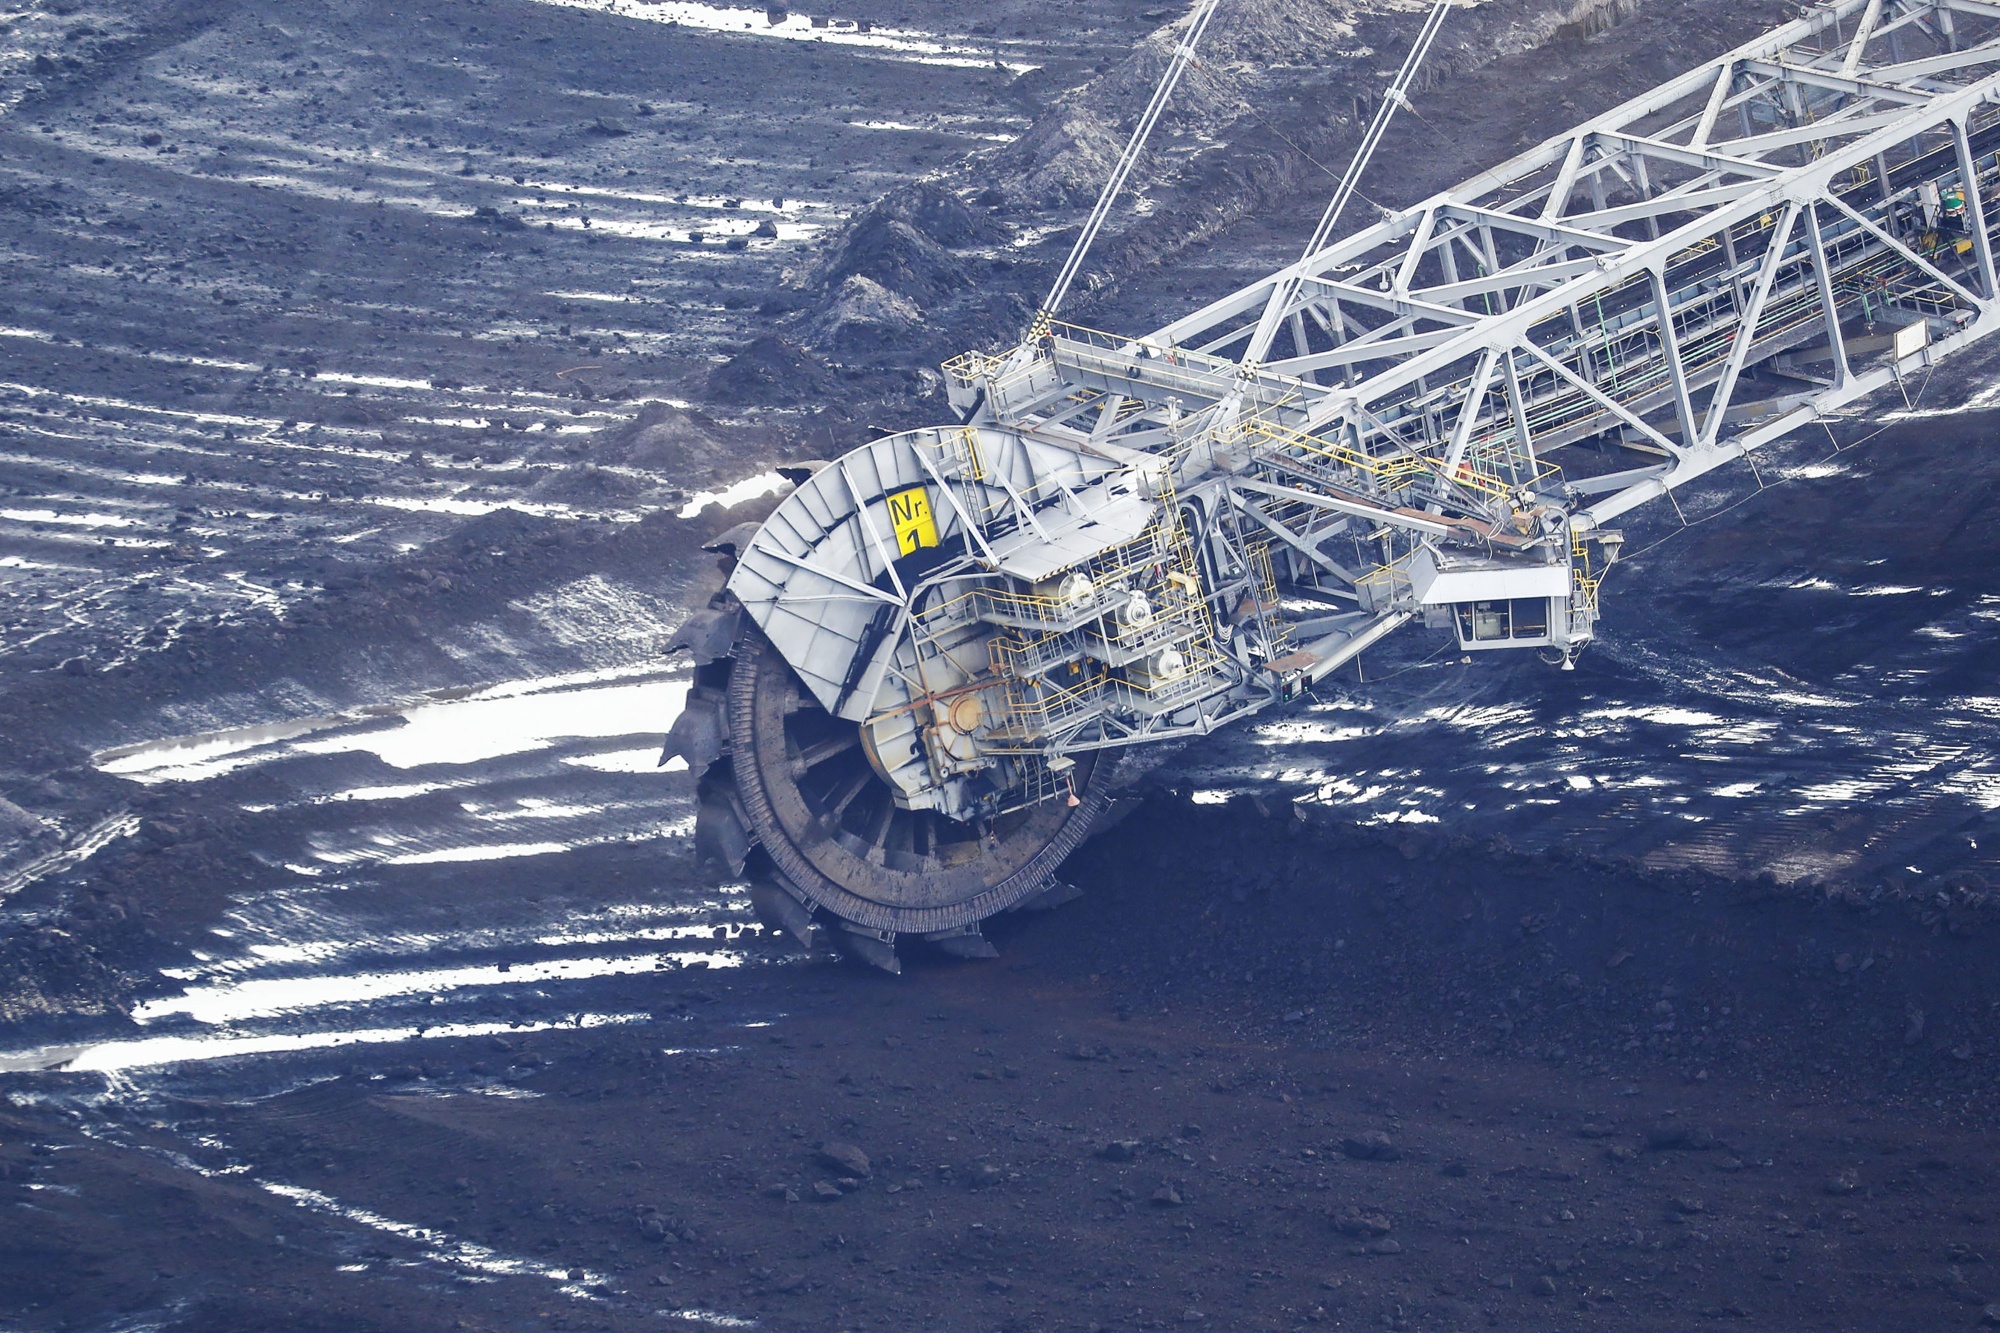 RWE AG Open Cast Lignite Mining as Germany Heads For Coal Exit